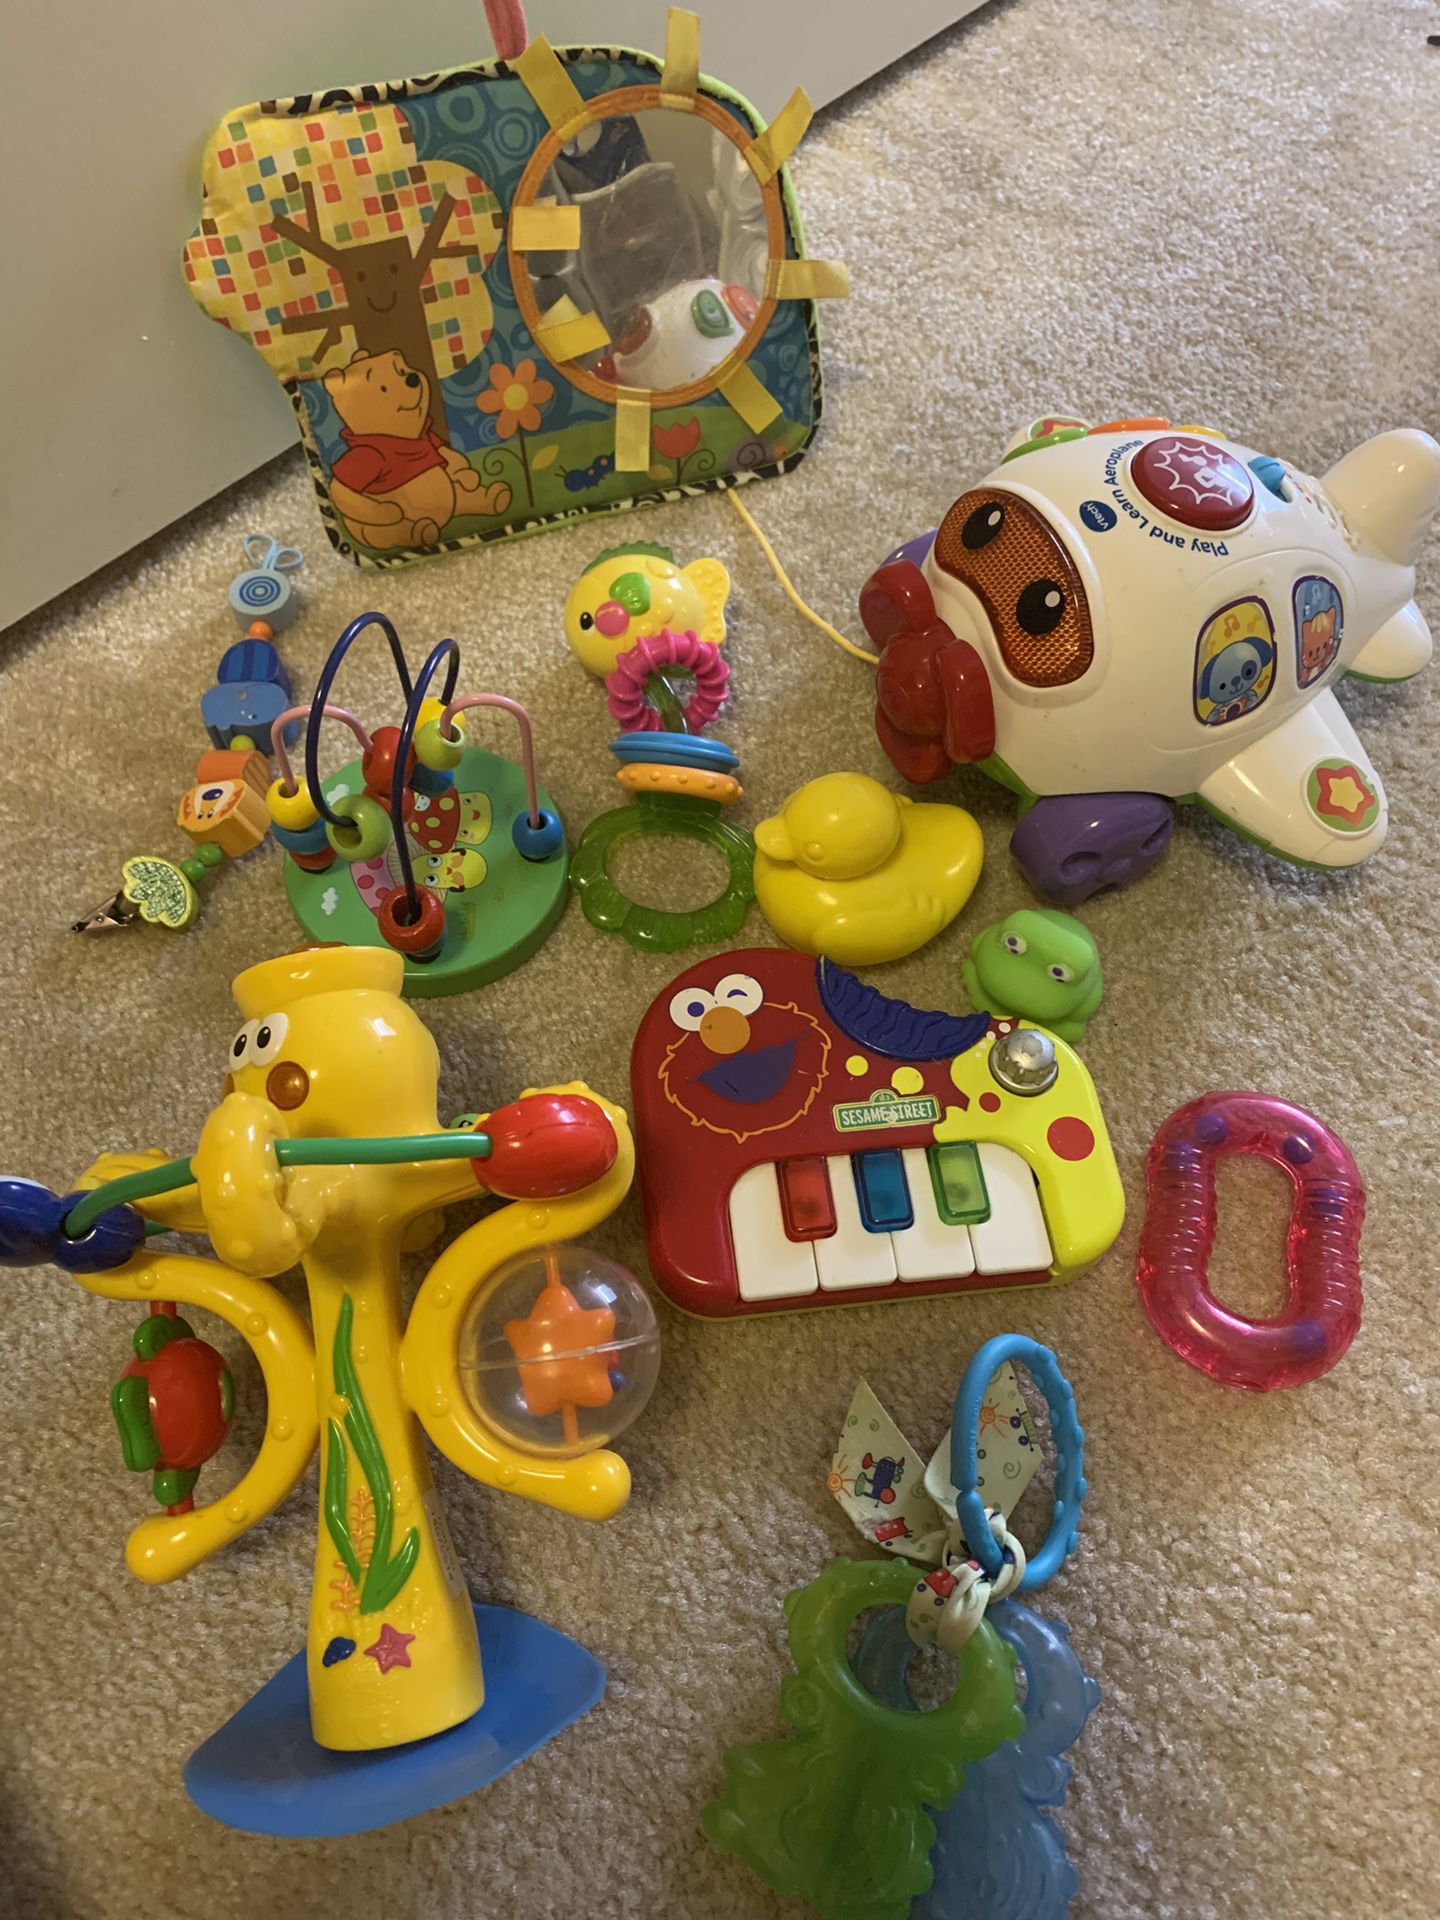 Toys, books, baby clothes and baby items